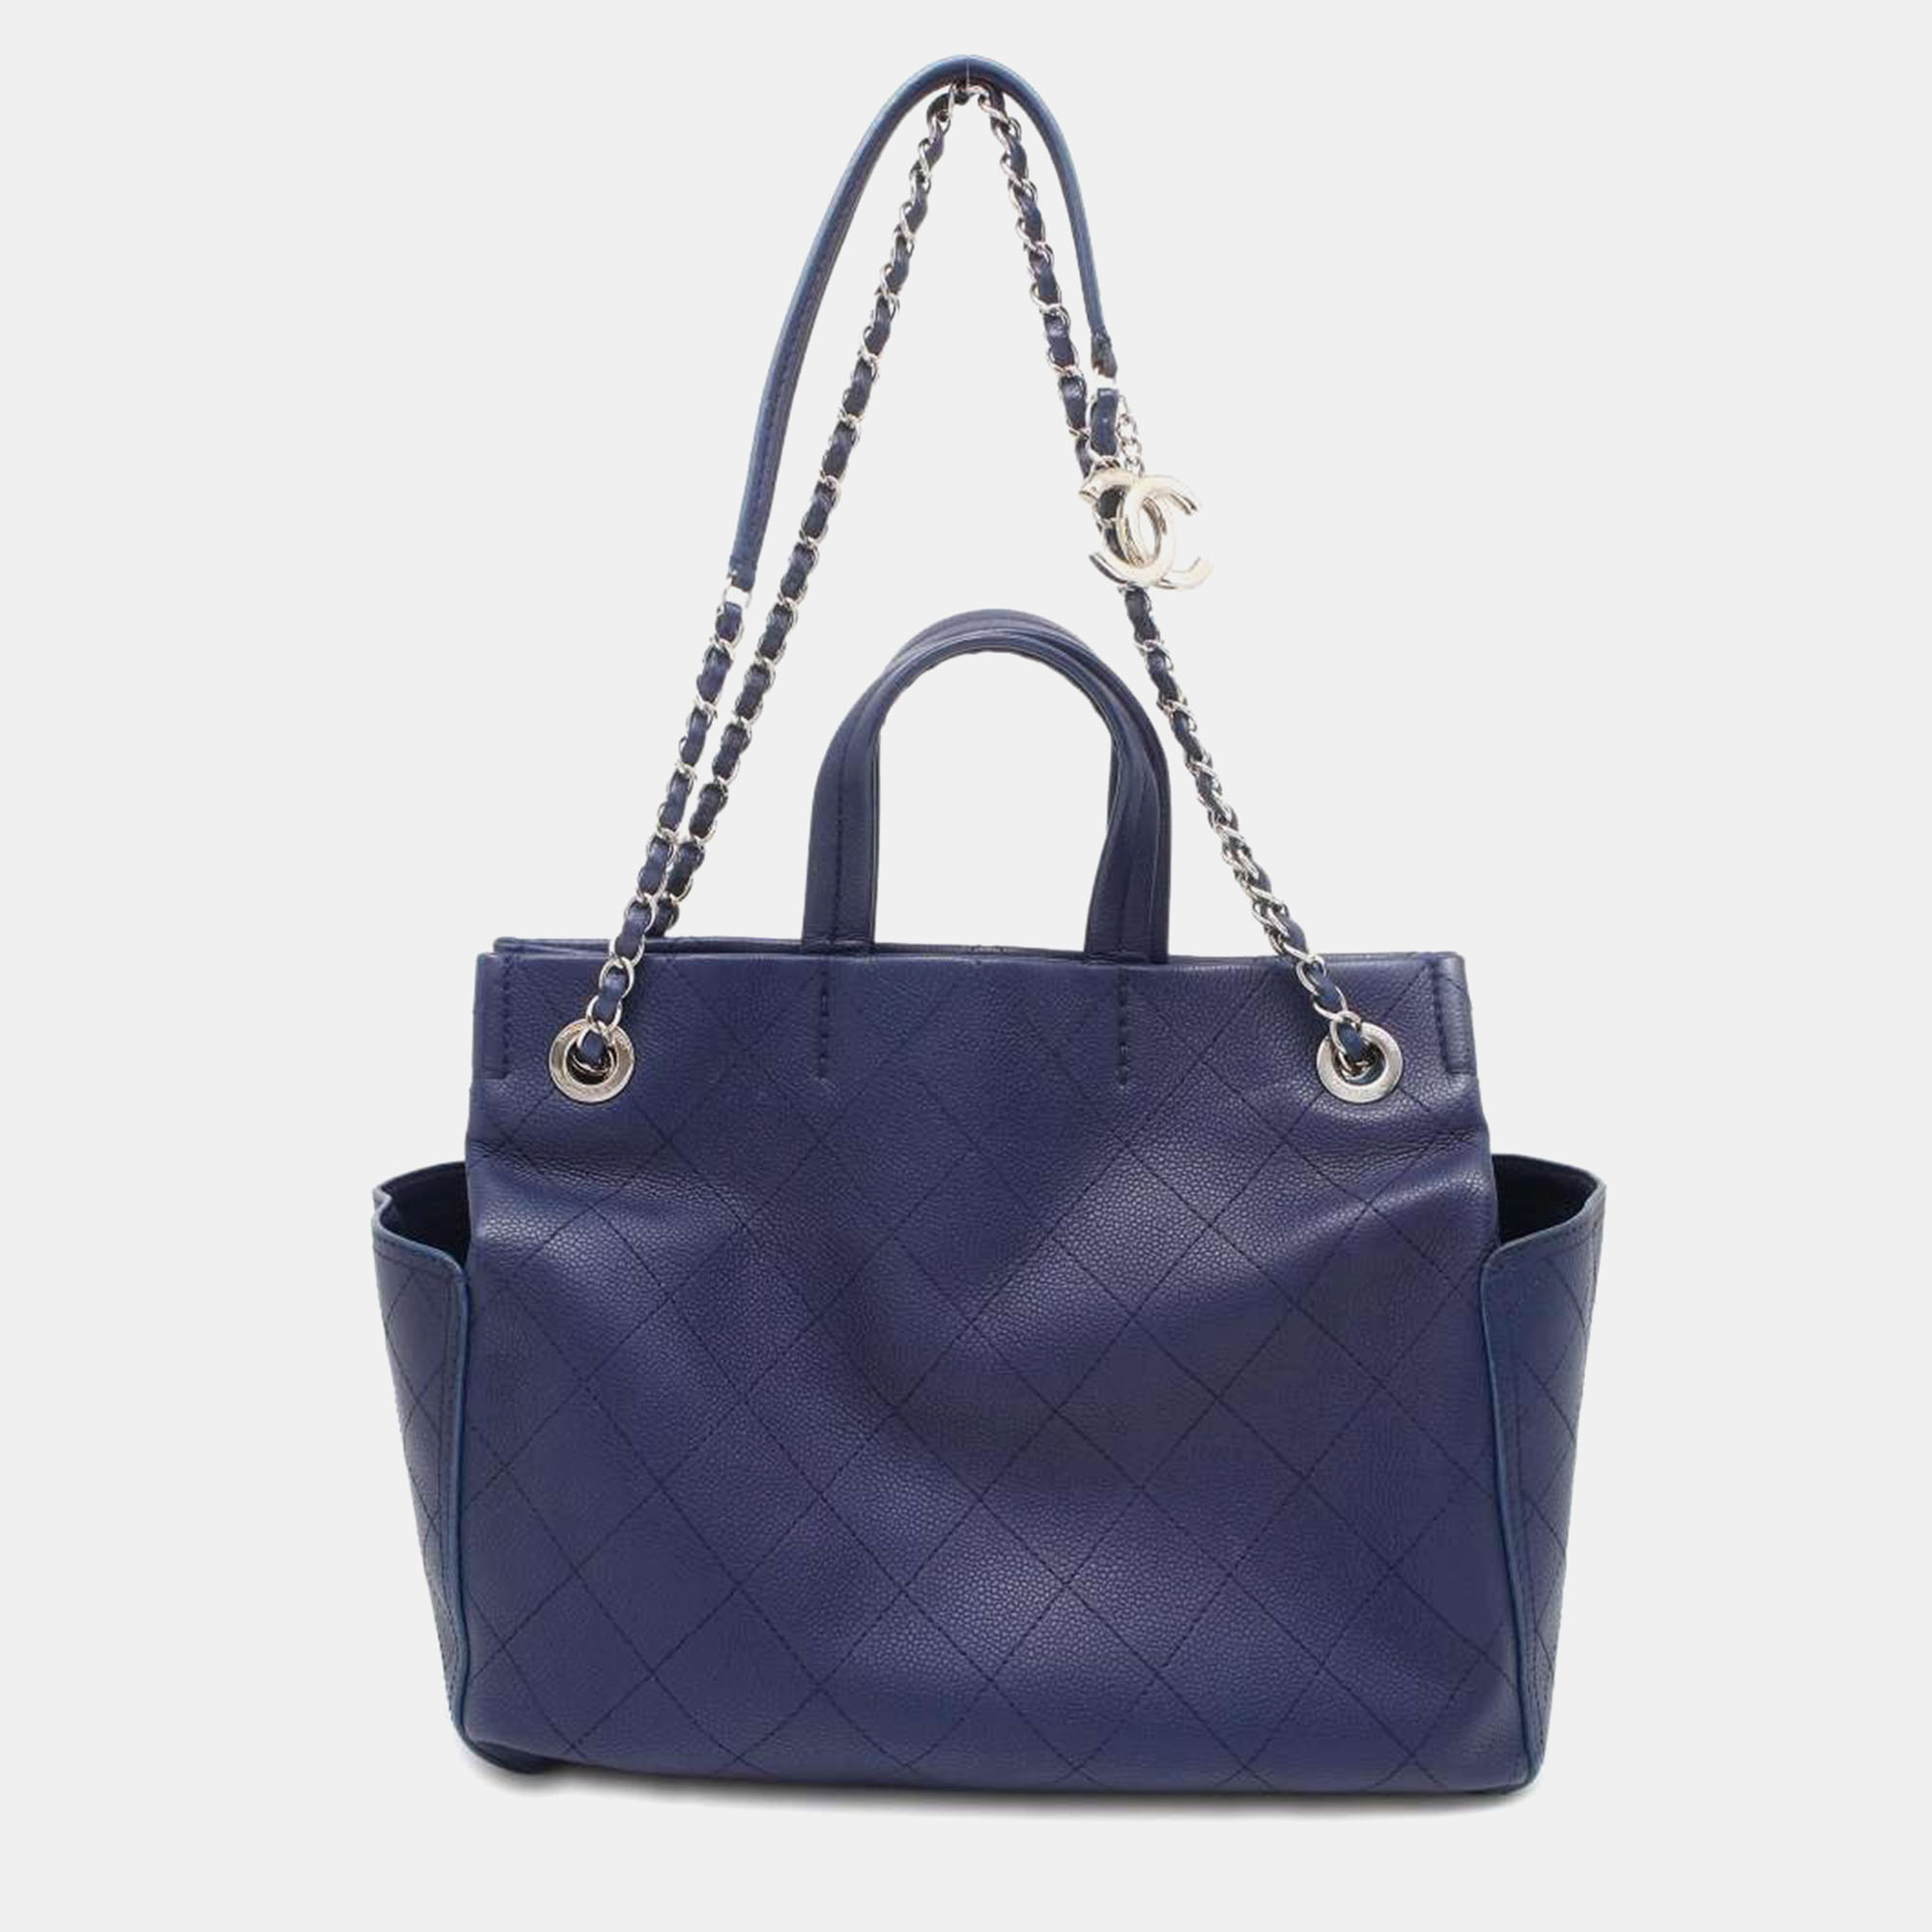 Chanel navy blue caviar leather tote bag